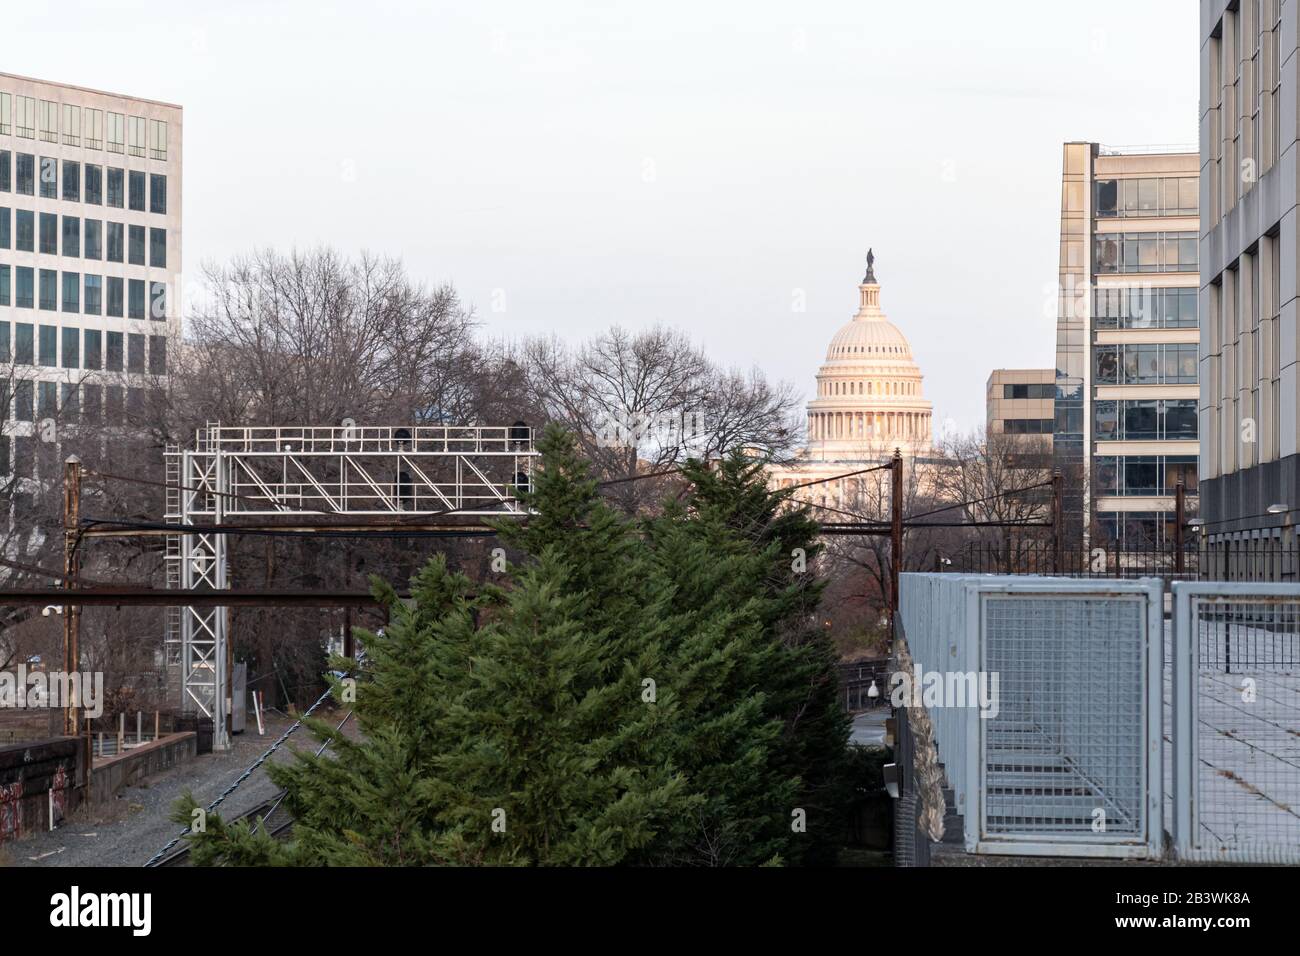 The US Capital Building Dome peaking out in the distance viewed from above a railroad line that runs through Washington, D.C. Stock Photo